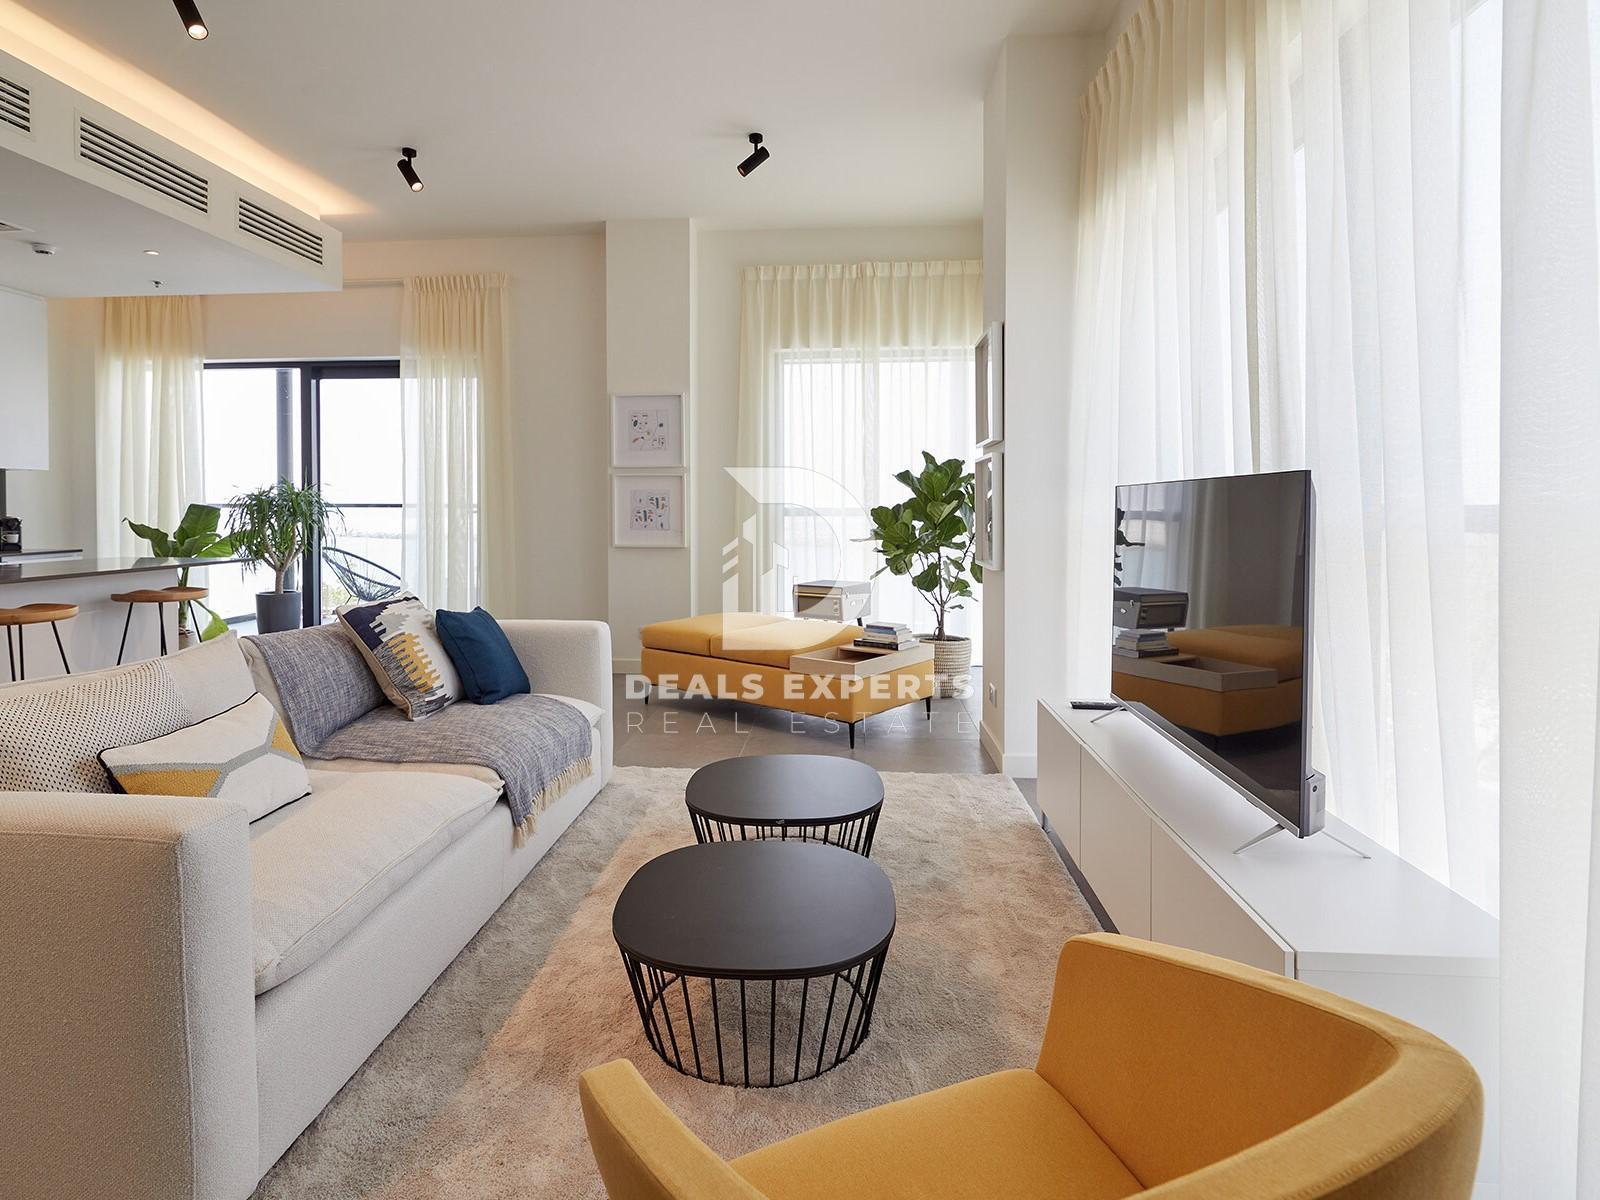 1 bed, 2 bath Apartment for sale in Pixel, Makers District, Al Reem Island, Abu Dhabi for price AED 1000000 